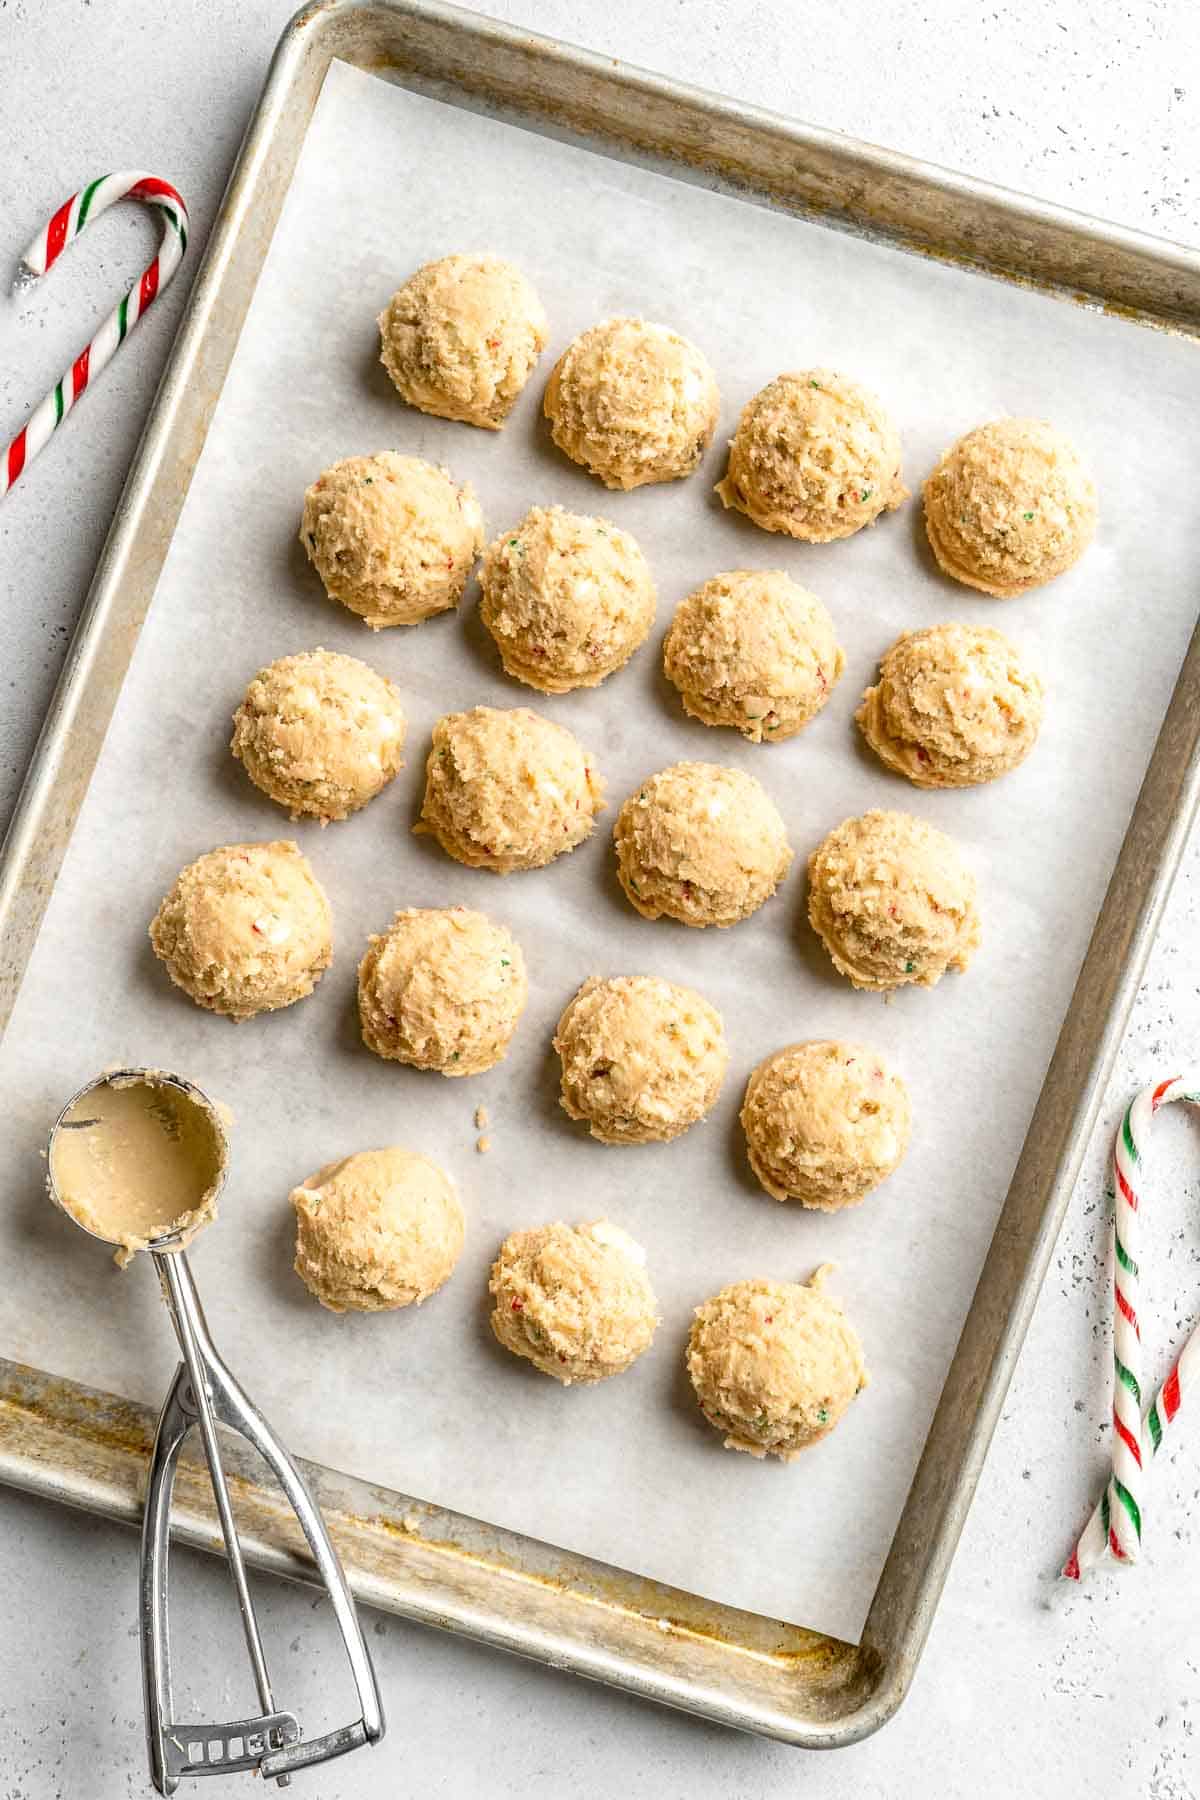 Sweet and chewy with little pops of candy canes, these White Chocolate Peppermint Cookies taste like Christmas in cookie form! Quick and easy too! | aheadofthyme.com